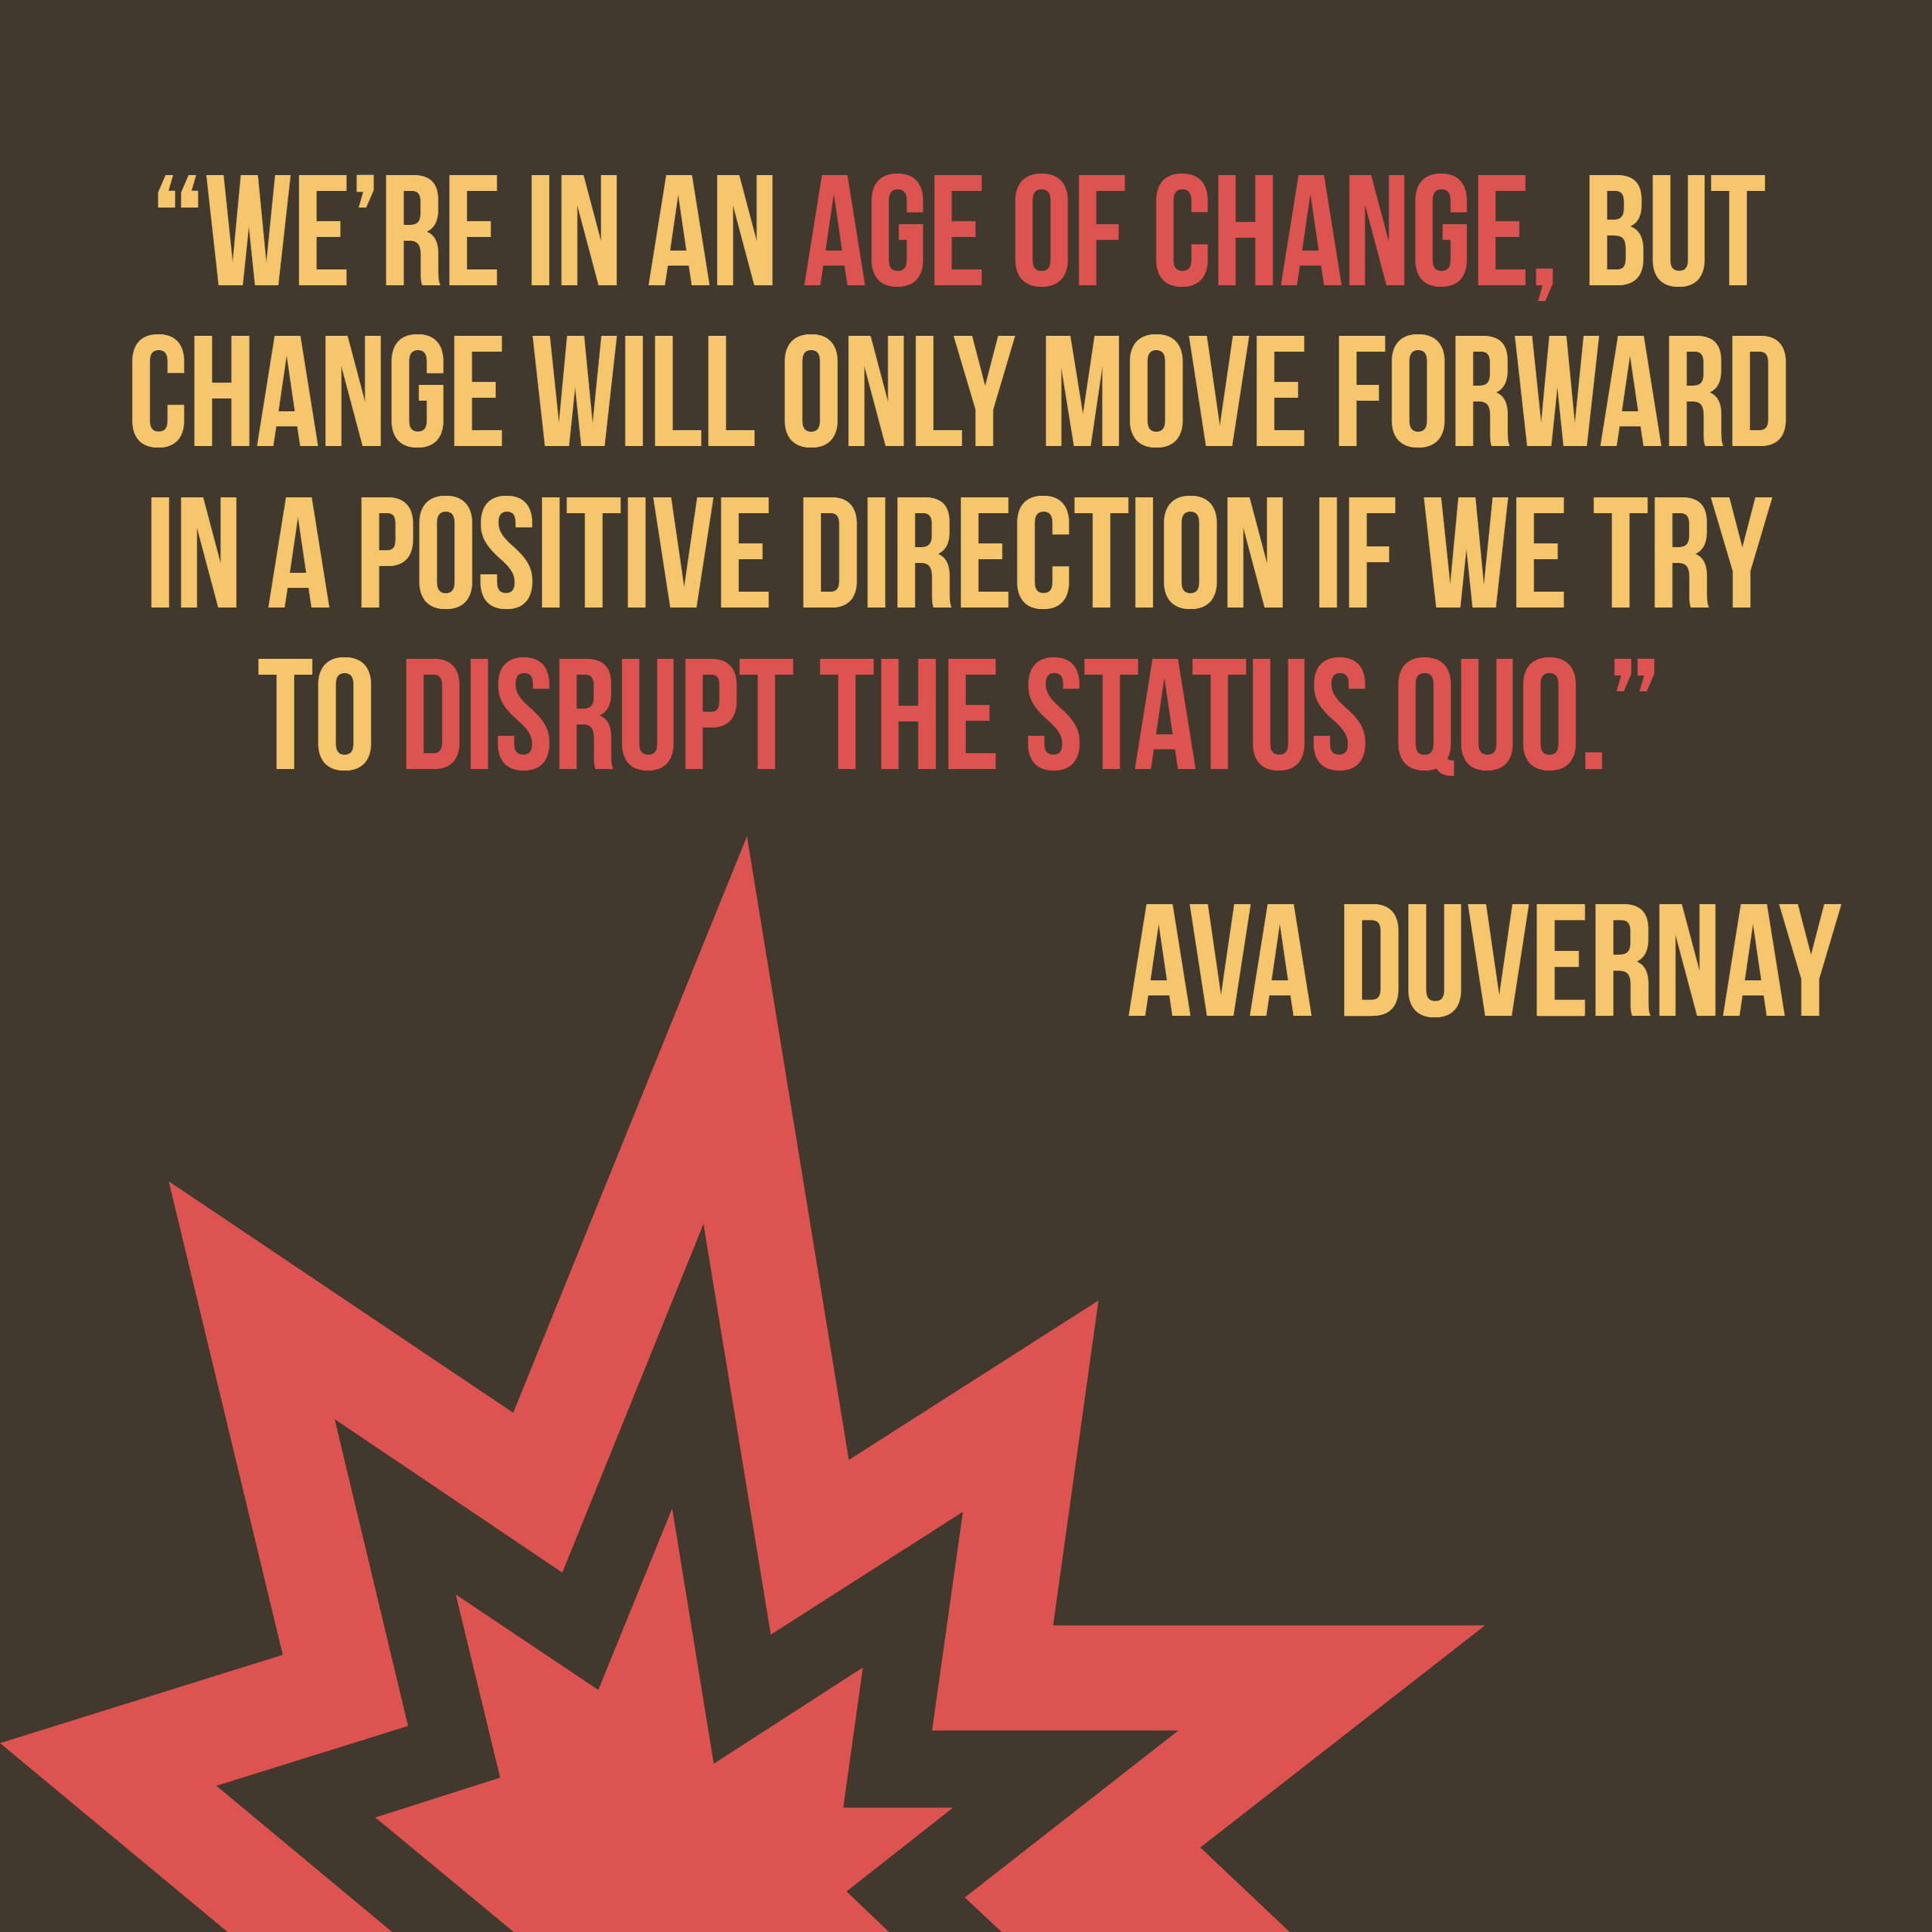 We're in an age of change, but change will only move forward in a positive direction if we try to disrupt the status quo.